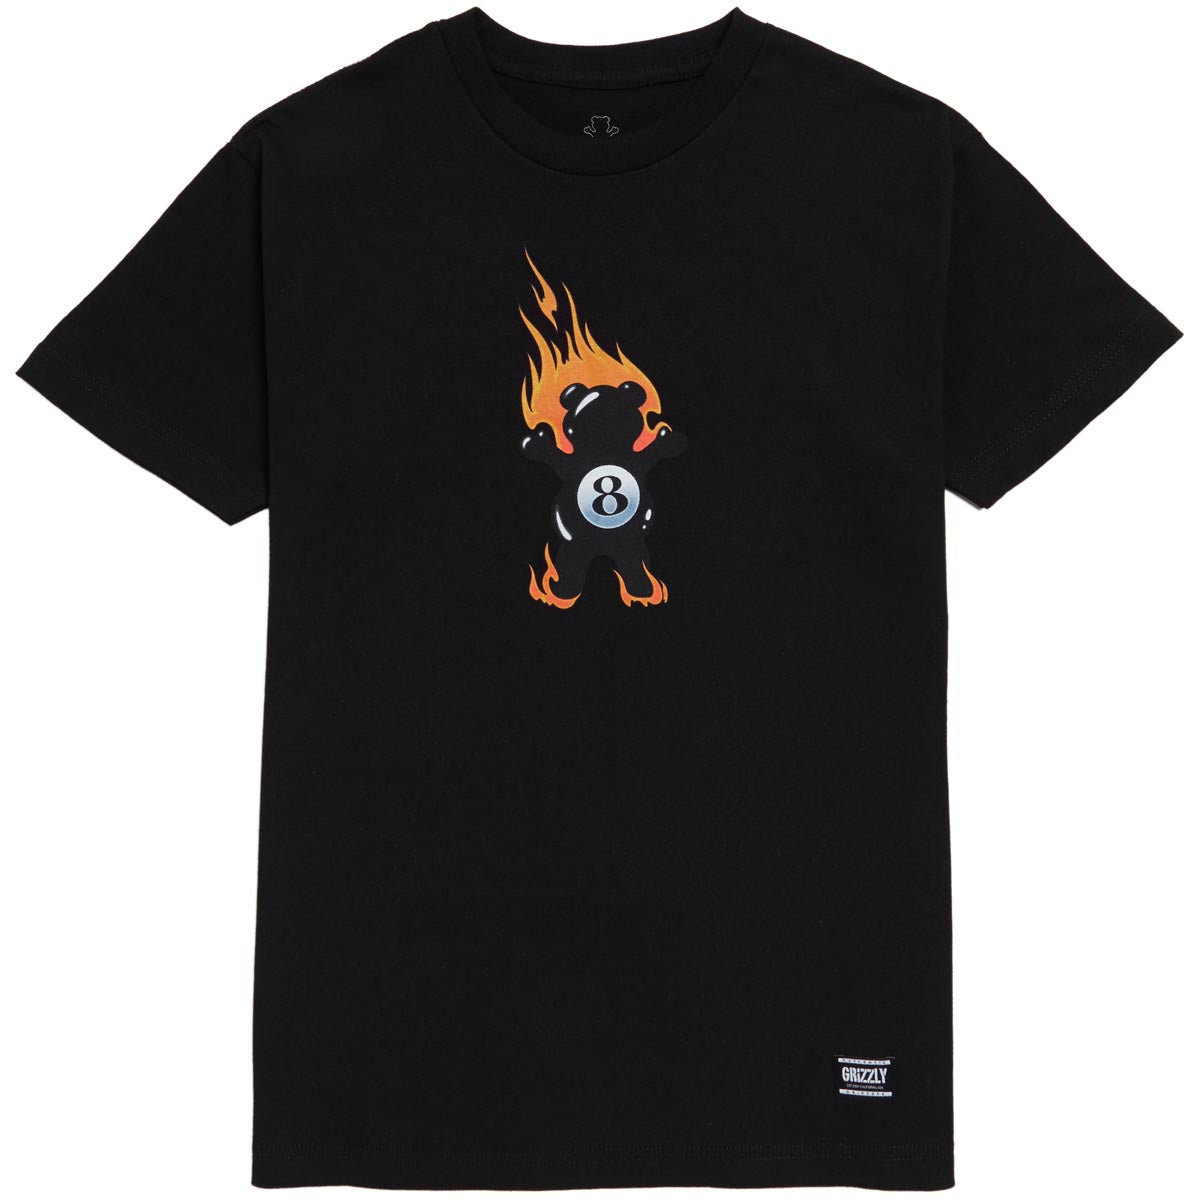 Grizzly Behind The 8Ball T-Shirt - Black image 1